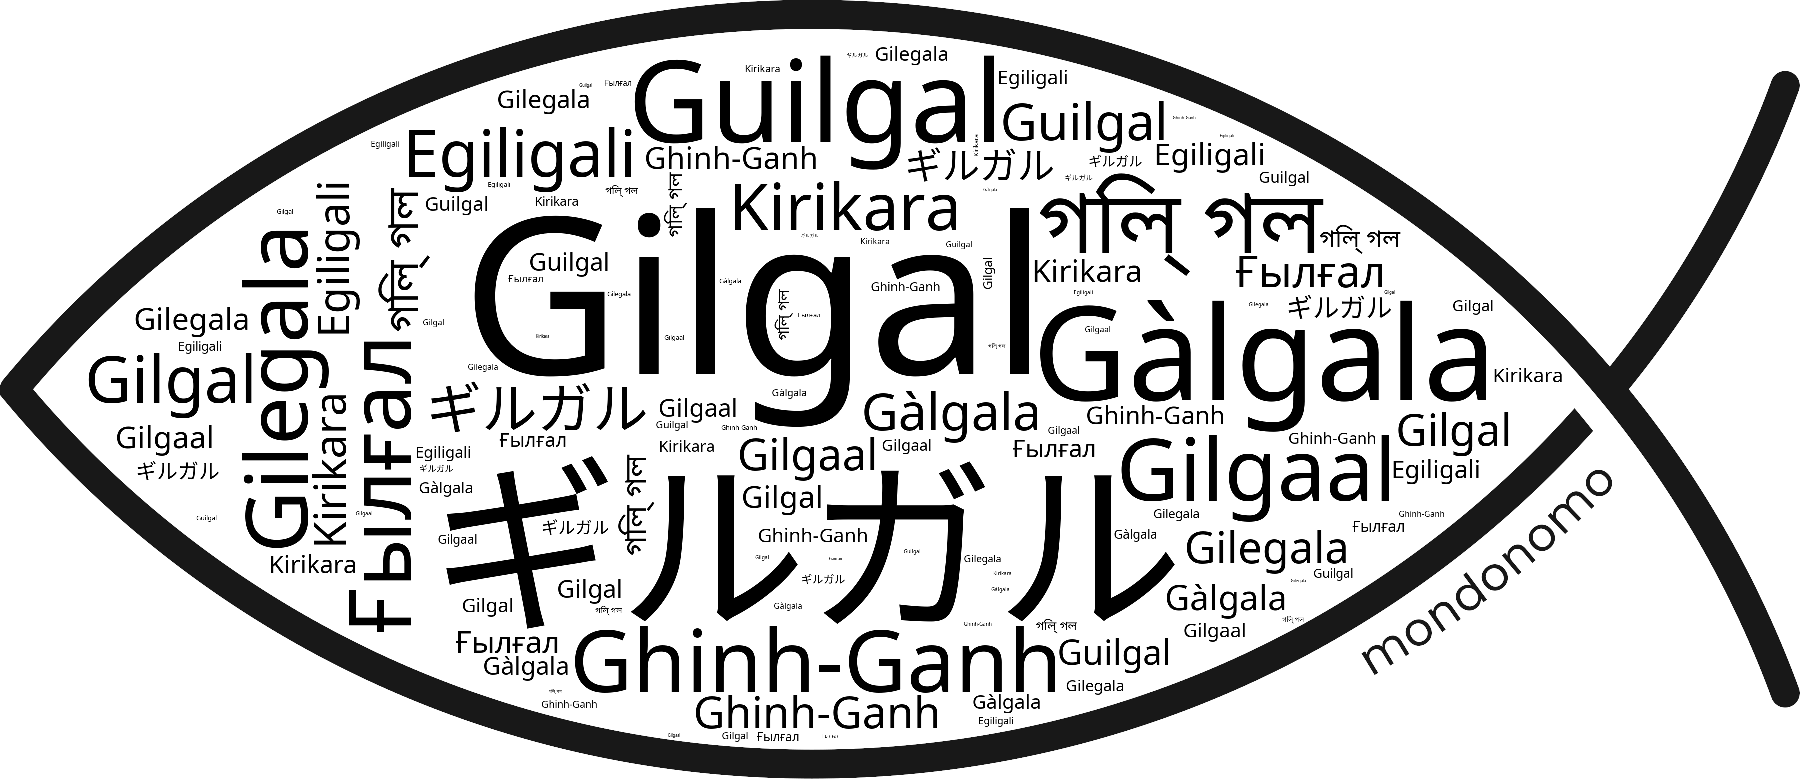 Name Gilgal in the world's Bibles